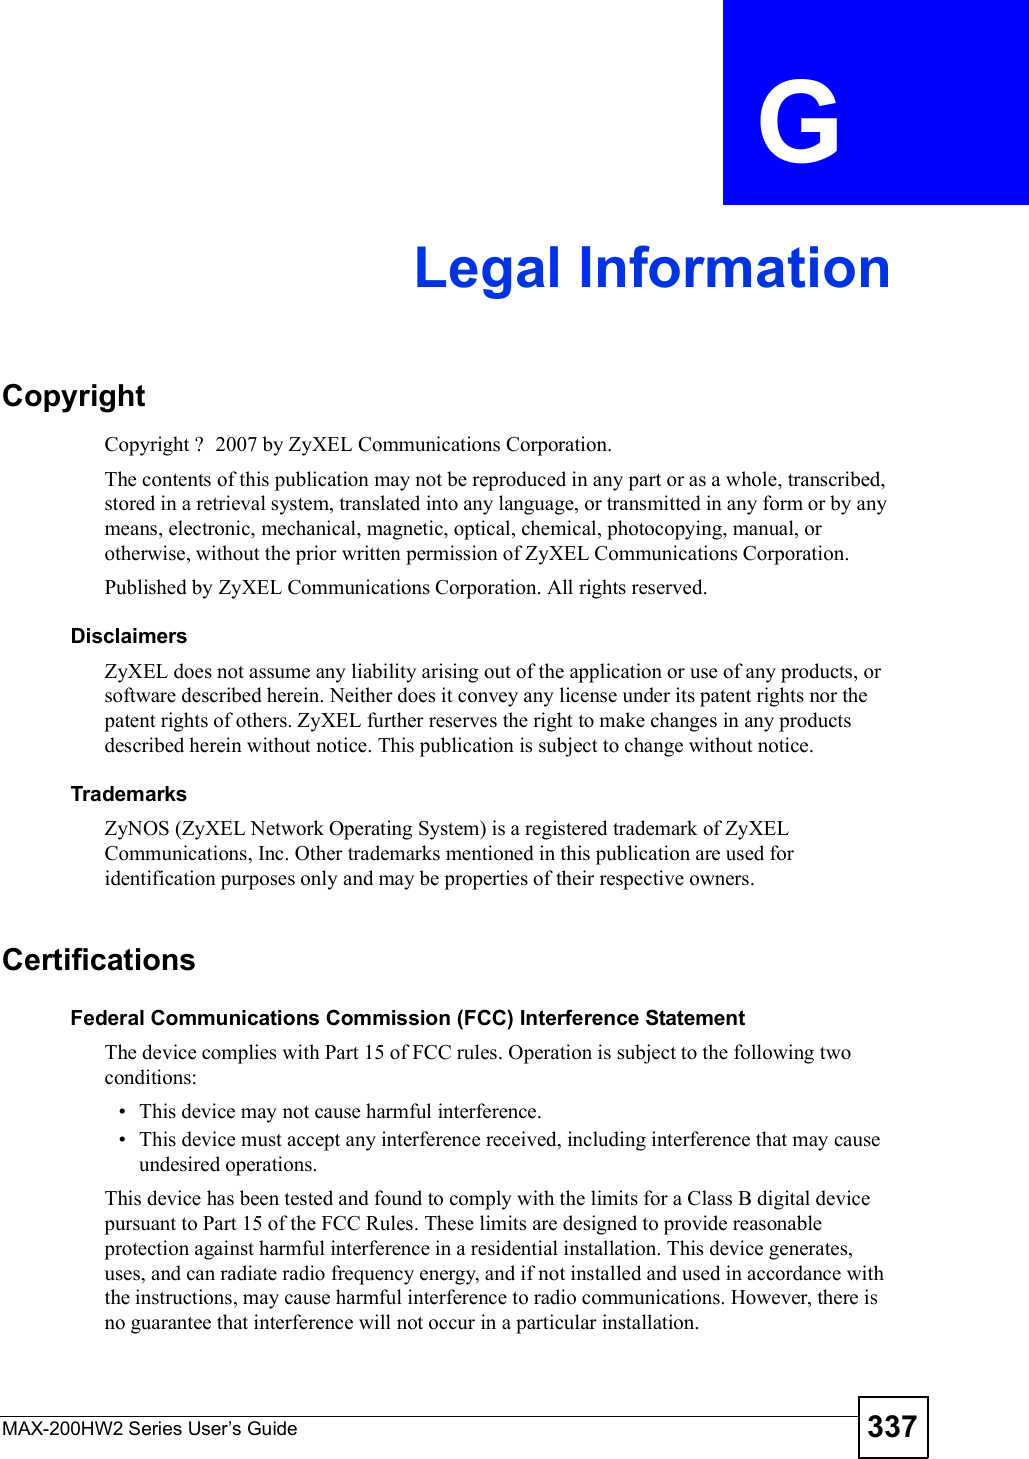 MAX-200HW2 Series User s Guide 337APPENDIX  G Legal InformationCopyrightCopyright ?2007 by ZyXEL Communications Corporation.The contents of this publication may not be reproduced in any part or as a whole, transcribed, stored in a retrieval system, translated into any language, or transmitted in any form or by any means, electronic, mechanical, magnetic, optical, chemical, photocopying, manual, or otherwise, without the prior written permission of ZyXEL Communications Corporation.Published by ZyXEL Communications Corporation. All rights reserved.DisclaimersZyXEL does not assume any liability arising out of the application or use of any products, or software described herein. Neither does it convey any license under its patent rights nor the patent rights of others. ZyXEL further reserves the right to make changes in any products described herein without notice. This publication is subject to change without notice.TrademarksZyNOS (ZyXEL Network Operating System) is a registered trademark of ZyXEL Communications, Inc. Other trademarks mentioned in this publication are used for identification purposes only and may be properties of their respective owners.CertificationsFederal Communications Commission (FCC) Interference StatementThe device complies with Part 15 of FCC rules. Operation is subject to the following two conditions: This device may not cause harmful interference. This device must accept any interference received, including interference that may cause undesired operations.This device has been tested and found to comply with the limits for a Class B digital device pursuant to Part 15 of the FCC Rules. These limits are designed to provide reasonable protection against harmful interference in a residential installation. This device generates, uses, and can radiate radio frequency energy, and if not installed and used in accordance with the instructions, may cause harmful interference to radio communications. However, there is no guarantee that interference will not occur in a particular installation.